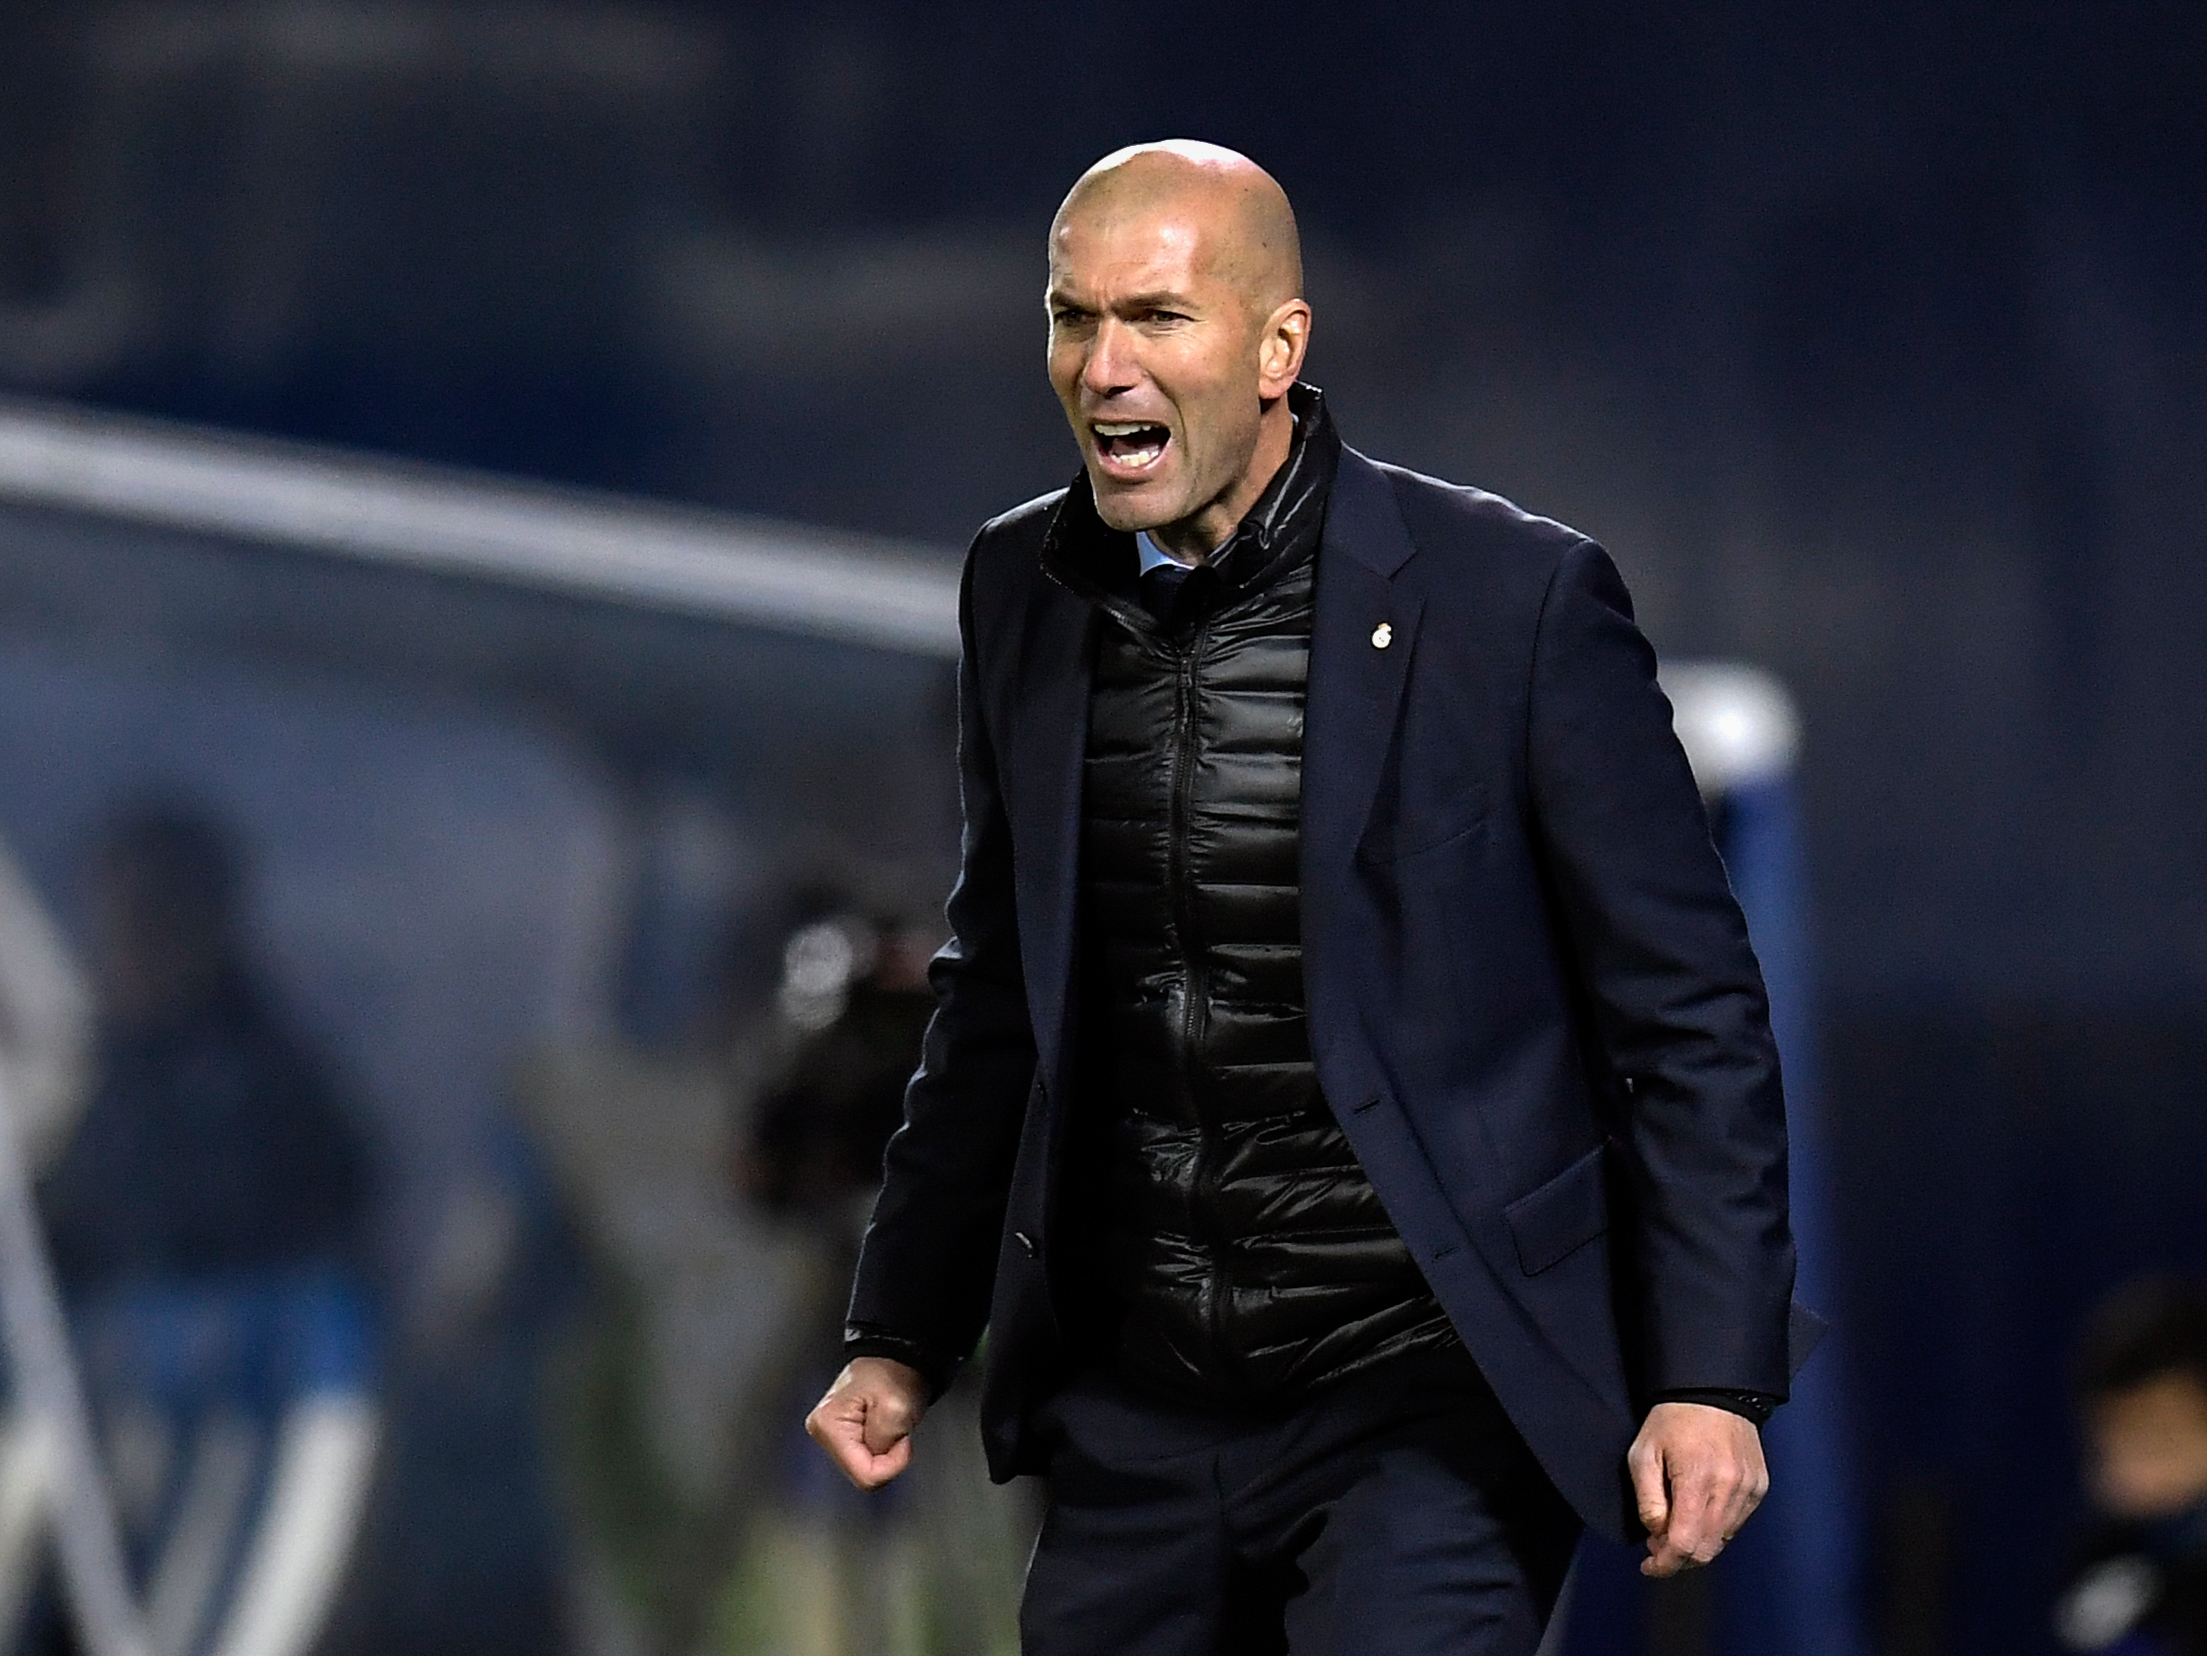 Real Madrid's French coach Zinedine Zidane gestures during the Spanish league football match Club Deportivo Leganes SAD against Real Madrid CF at the Estadio Municipal Butarque in Leganes on the outskirts of Madrid on February 21, 2018. / AFP PHOTO / OSCAR DEL POZO        (Photo credit should read OSCAR DEL POZO/AFP/Getty Images)